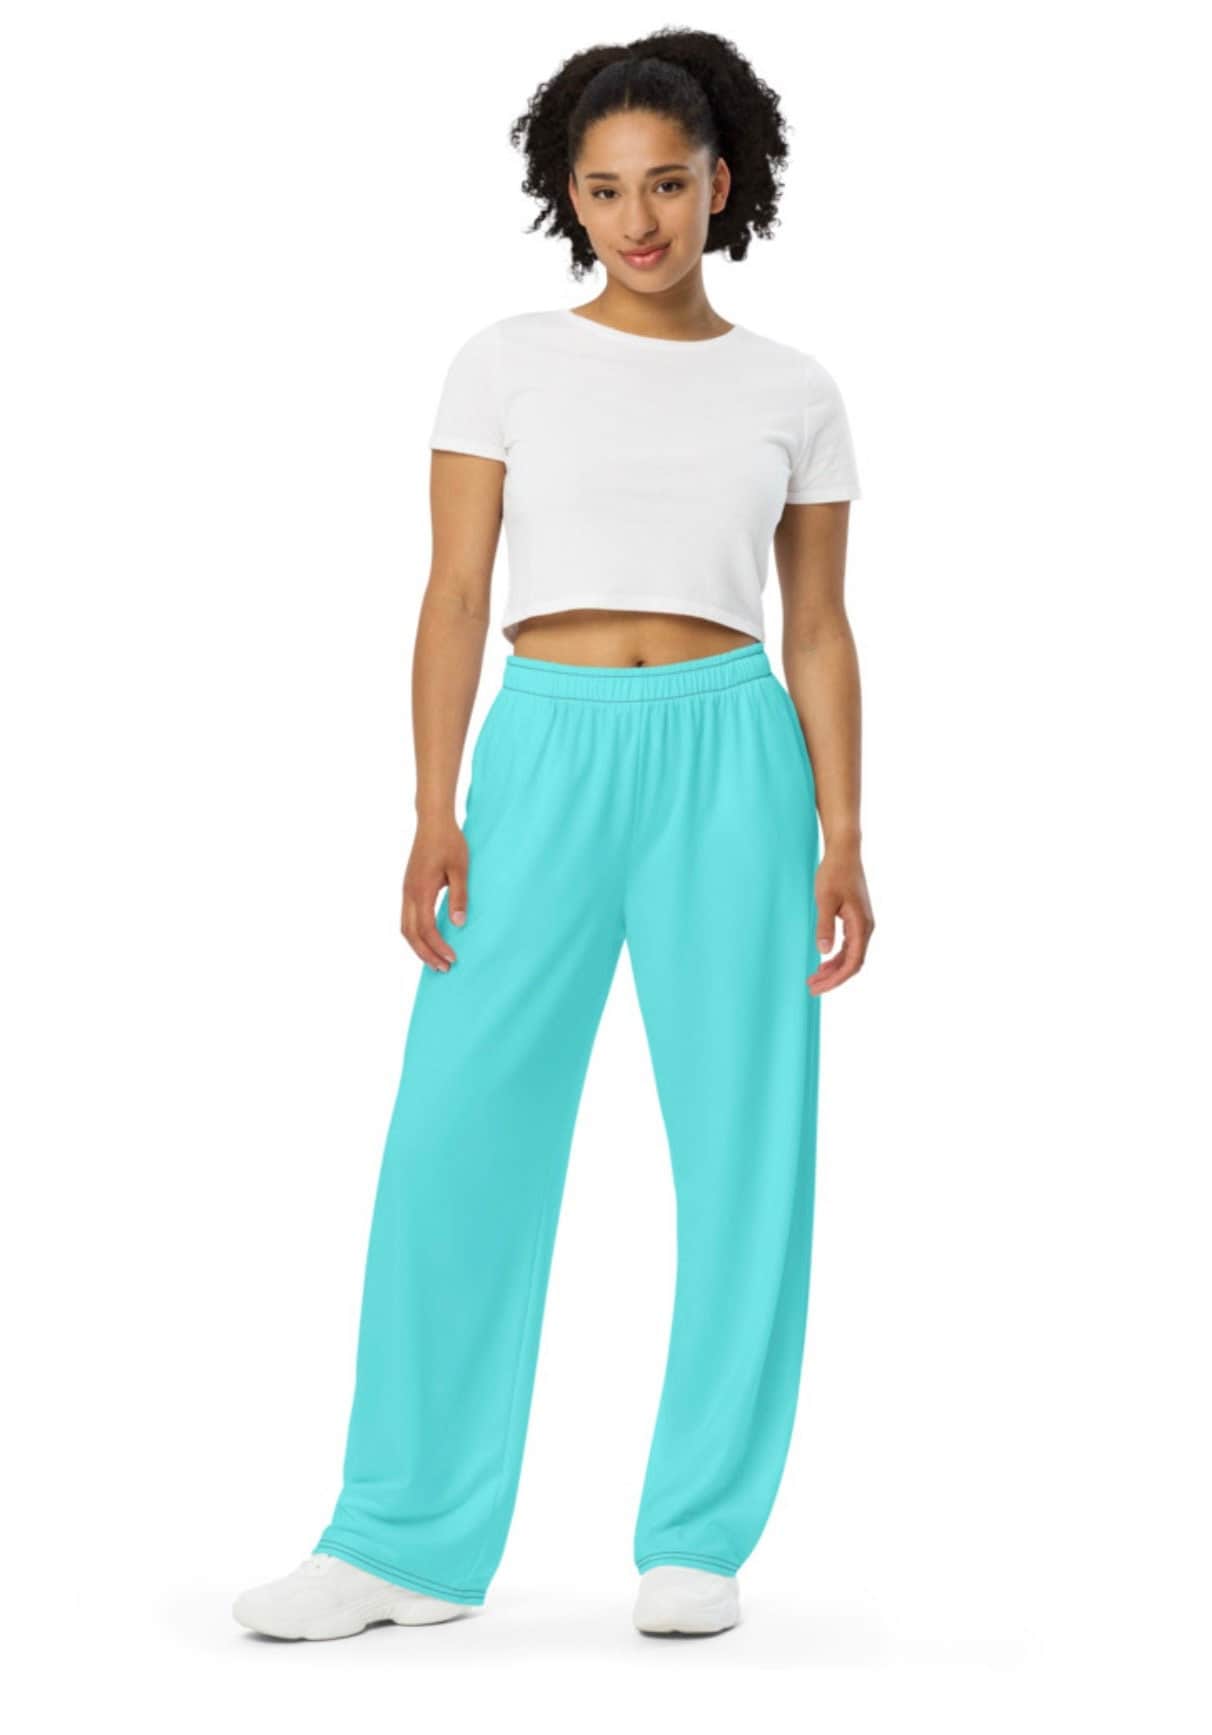 Womens Wide-leg Turquoise Sweatpants, Girls Workout Pants,fleece,gym  Clothes,teen,back to School, School Clothes,abstract FLOWERS 